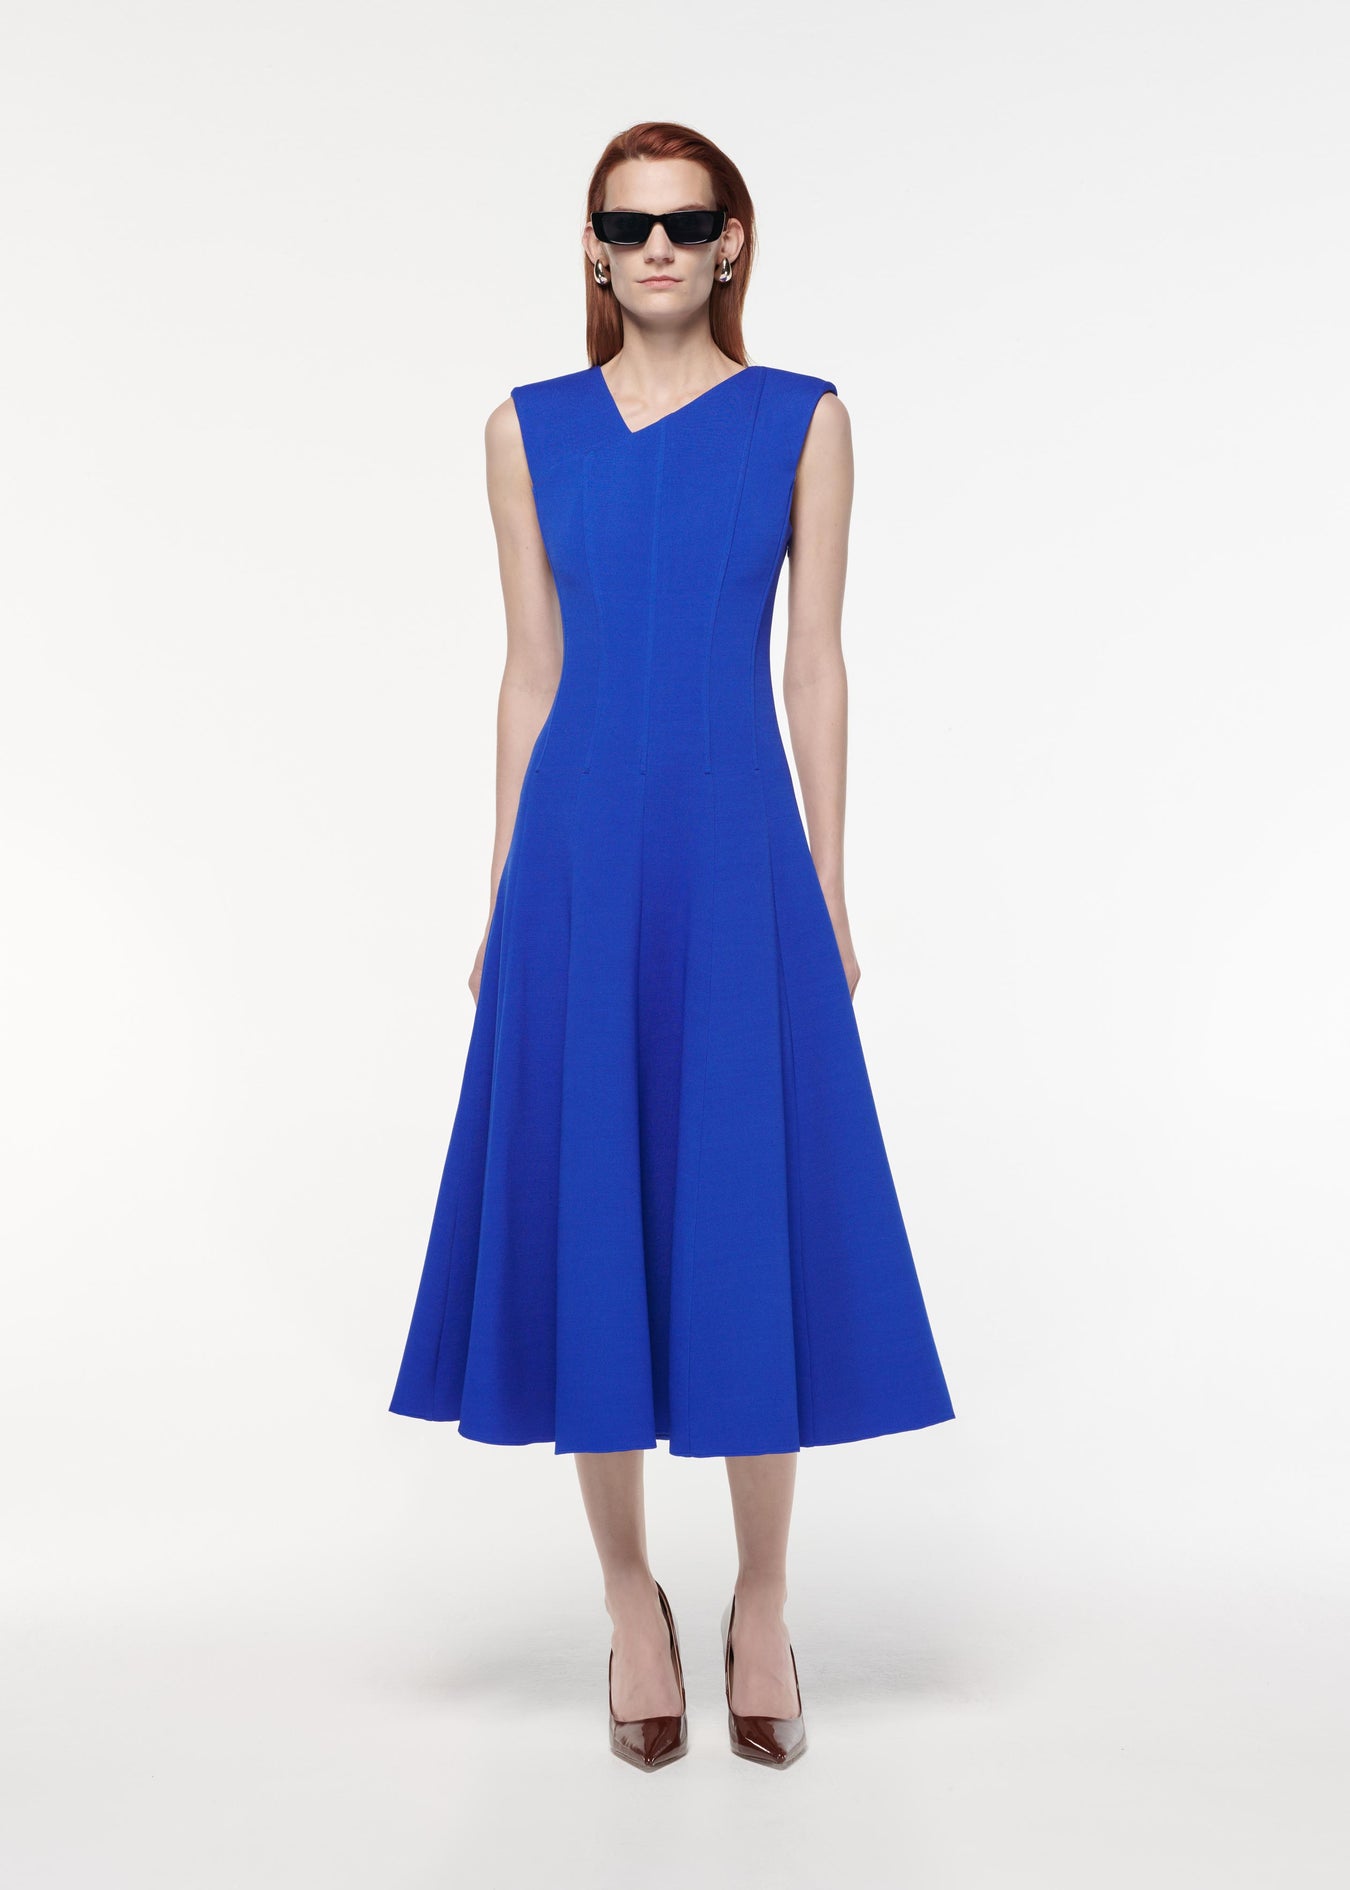 A photograph of a woman wearing a Stretch Wool Silk Midi Dress in Blue